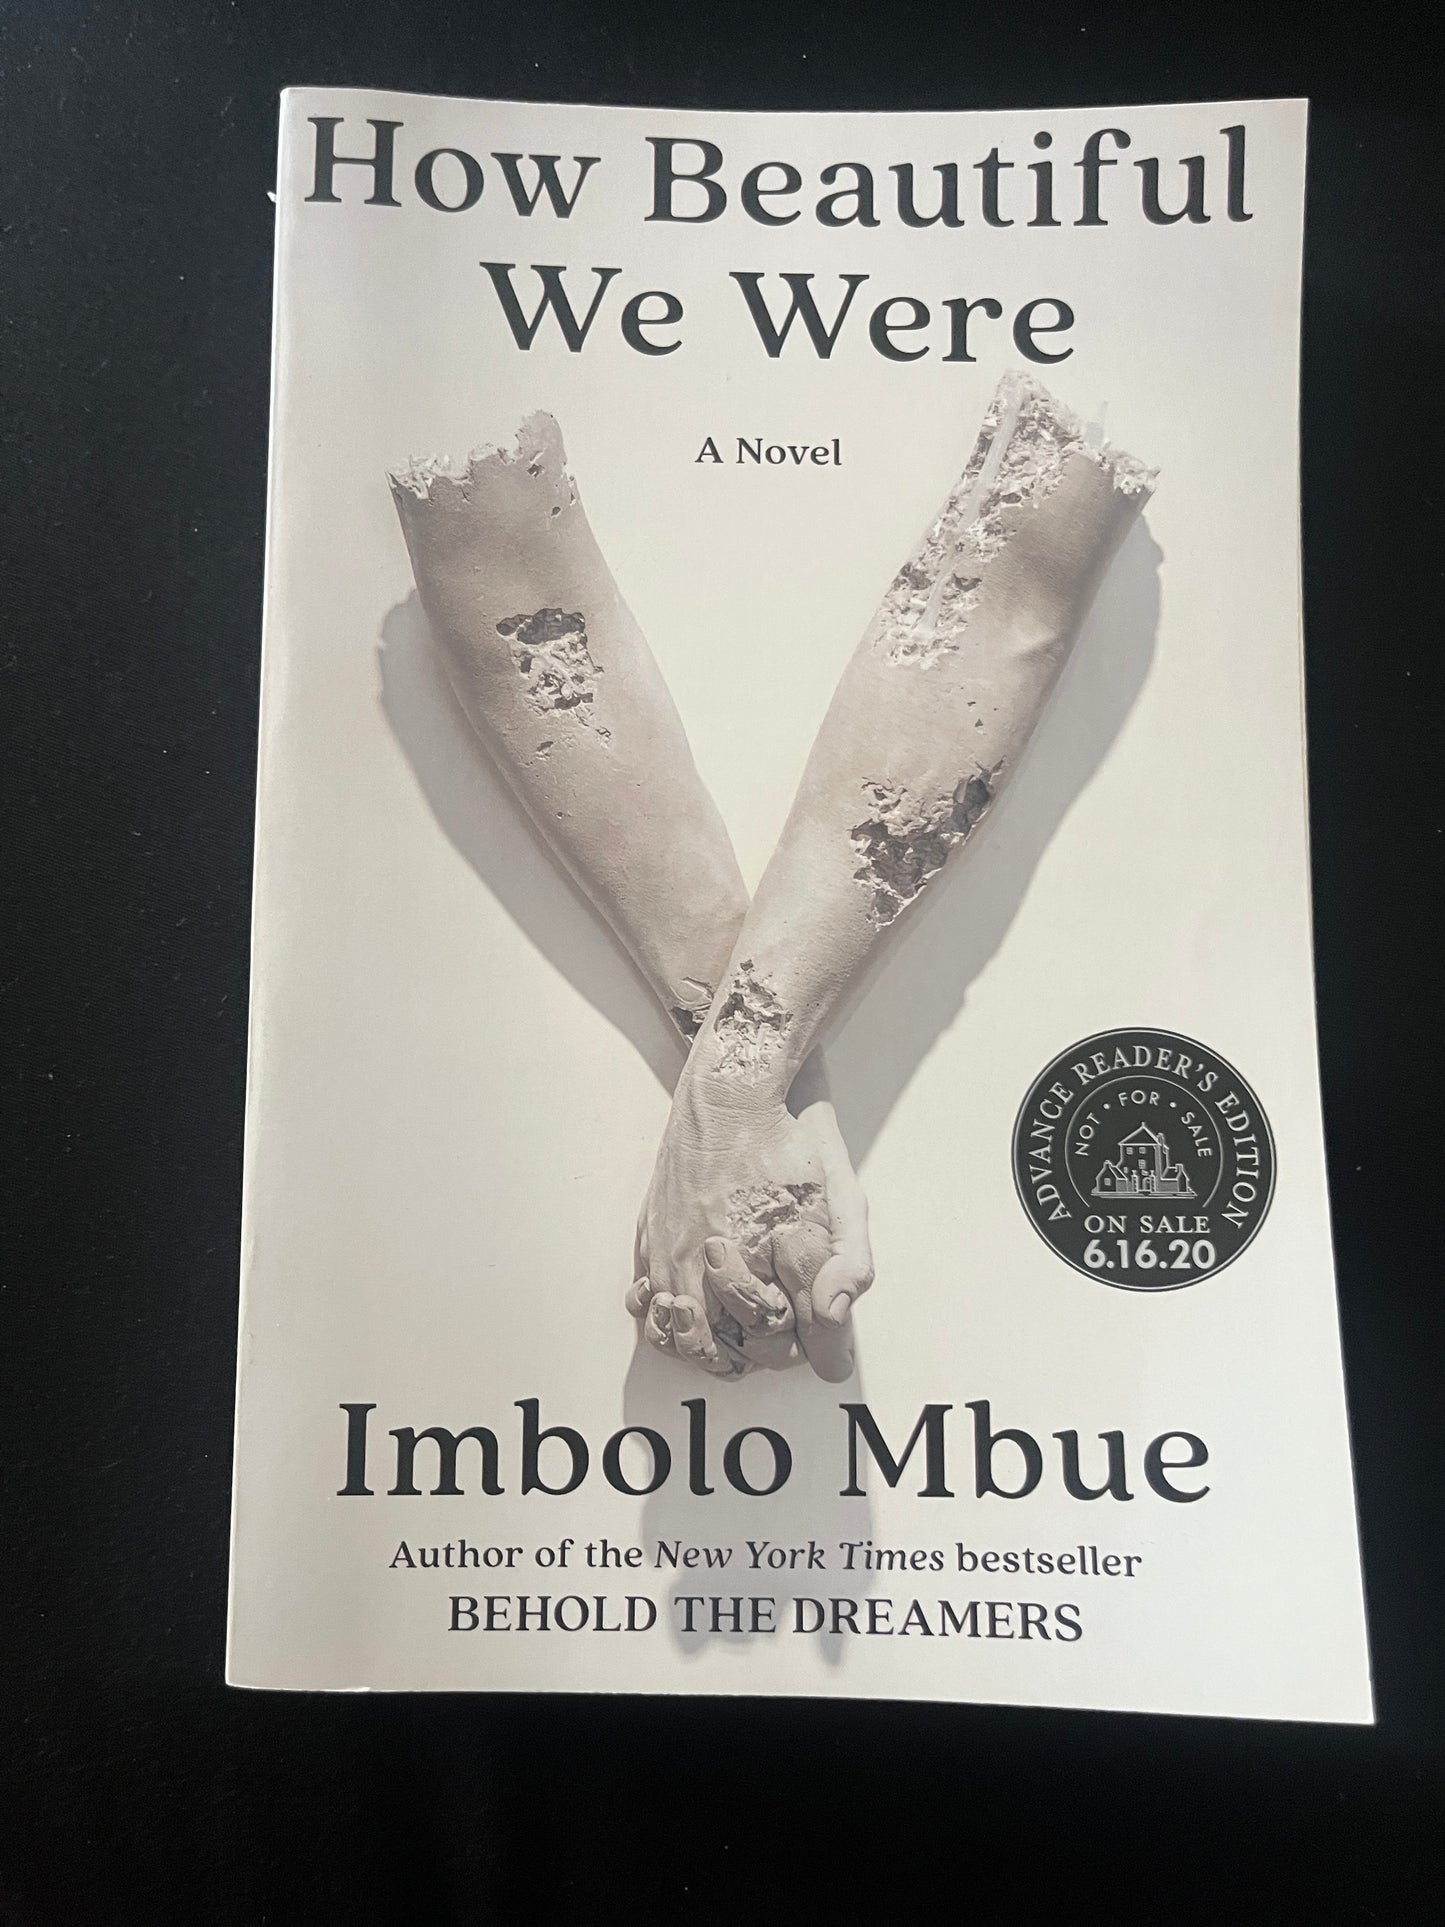 HOW BEAUTIFUL WE WERE by Imbolo Mbue